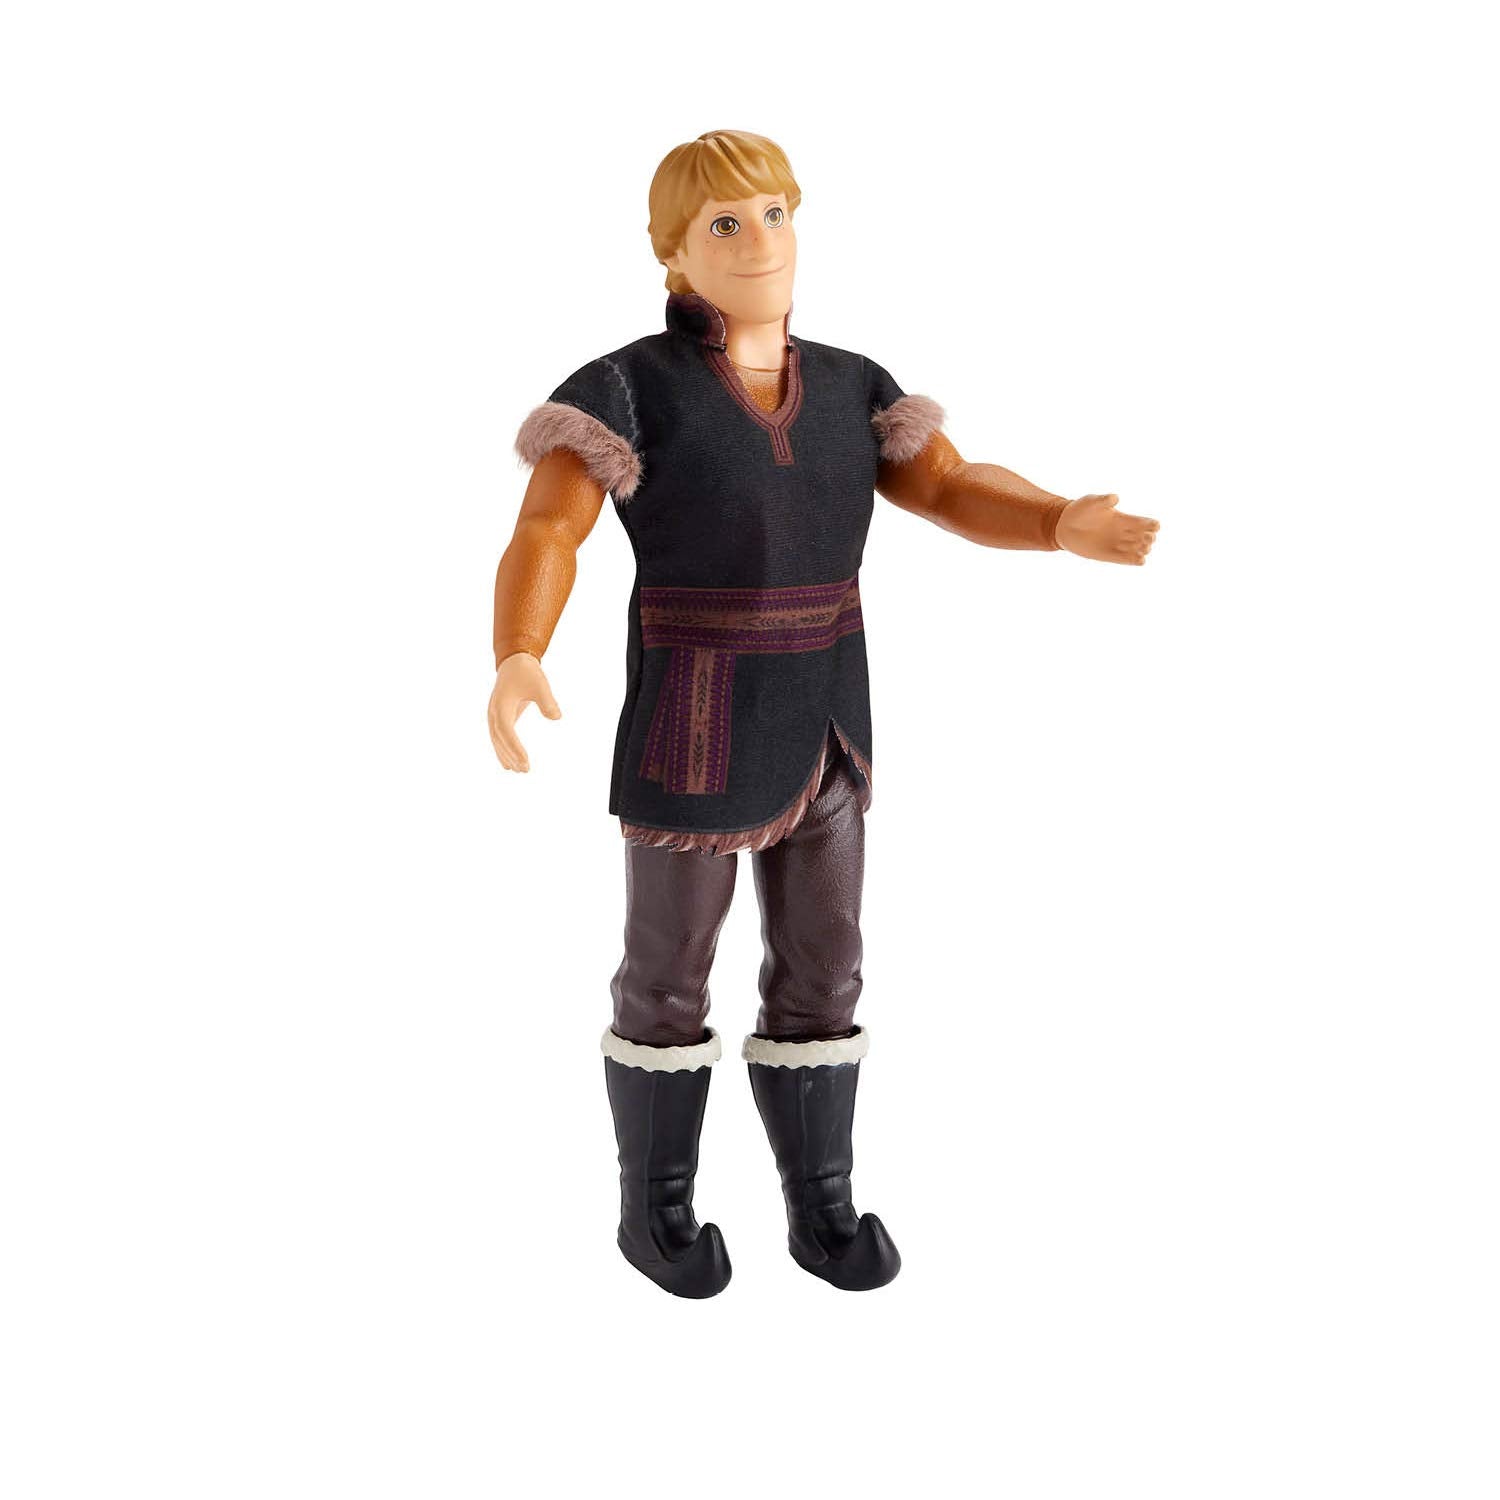 Disney Frozen Kristoff Fashion Doll with Brown Outfit Inspired by The Frozen 2 Movie - Toy for Kids 3 Years Old & Up